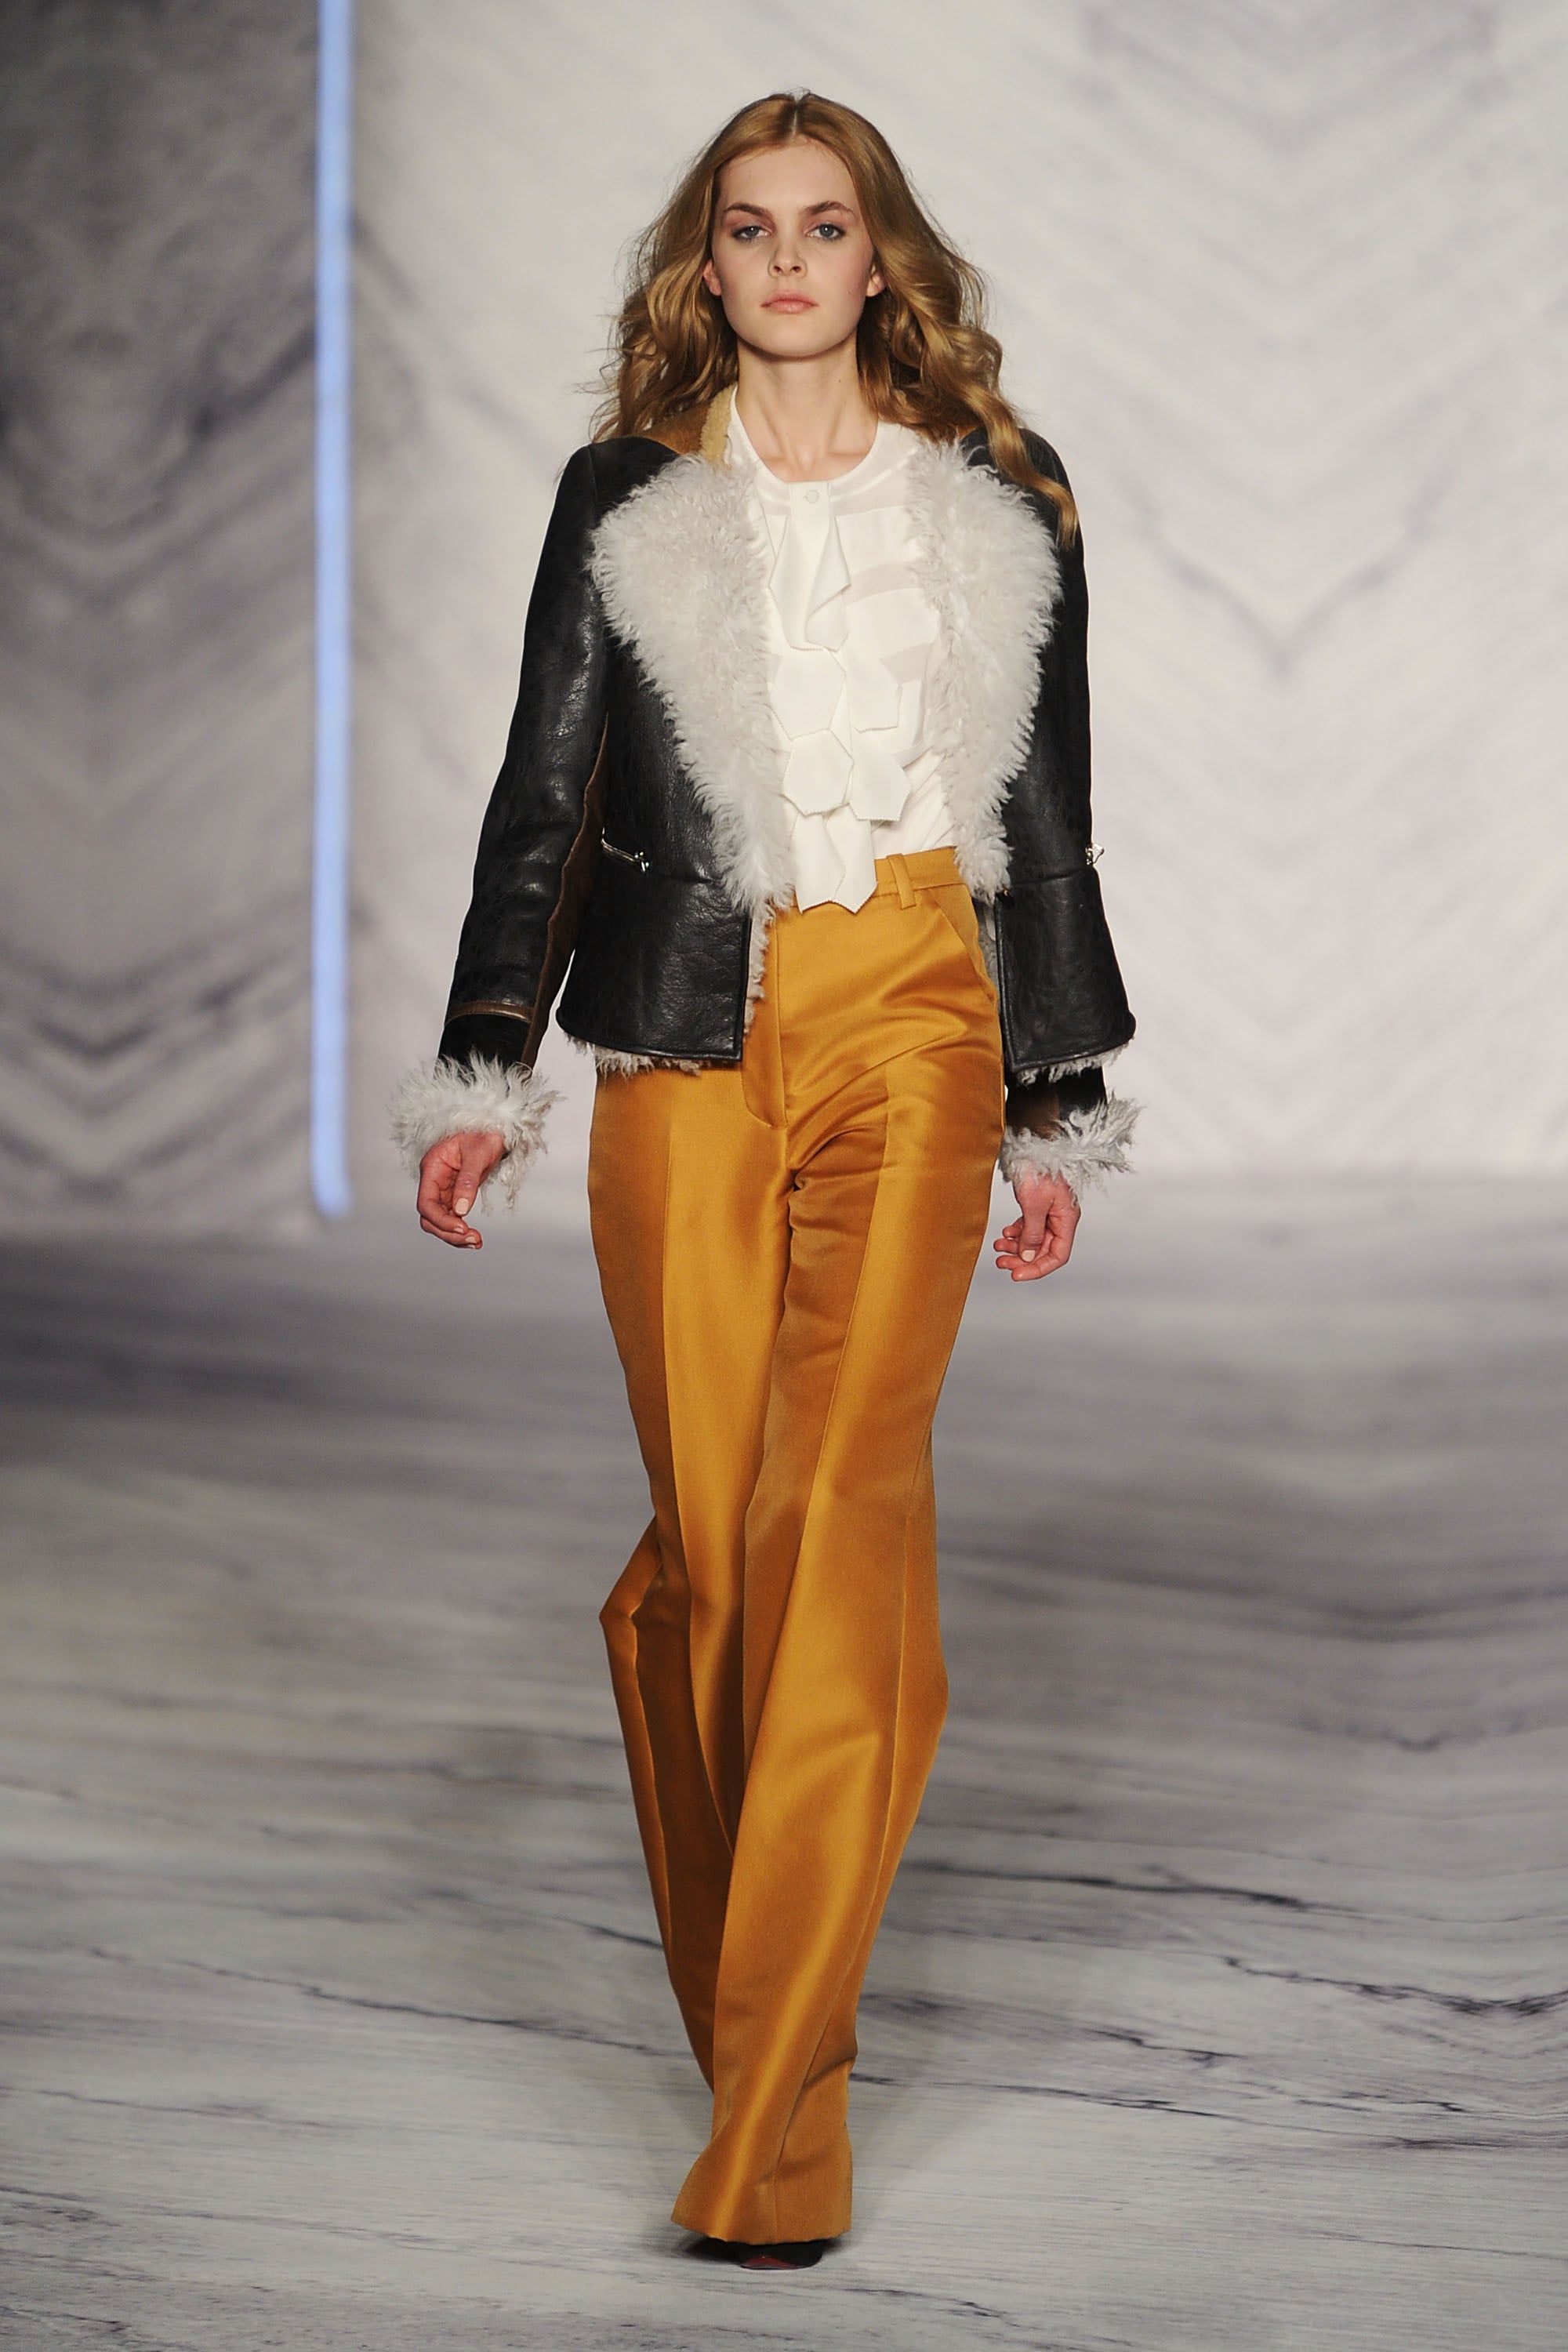 Photos of Phillip Lim's Fall 2010 Collection 2010-02-17 16:30:08 ...